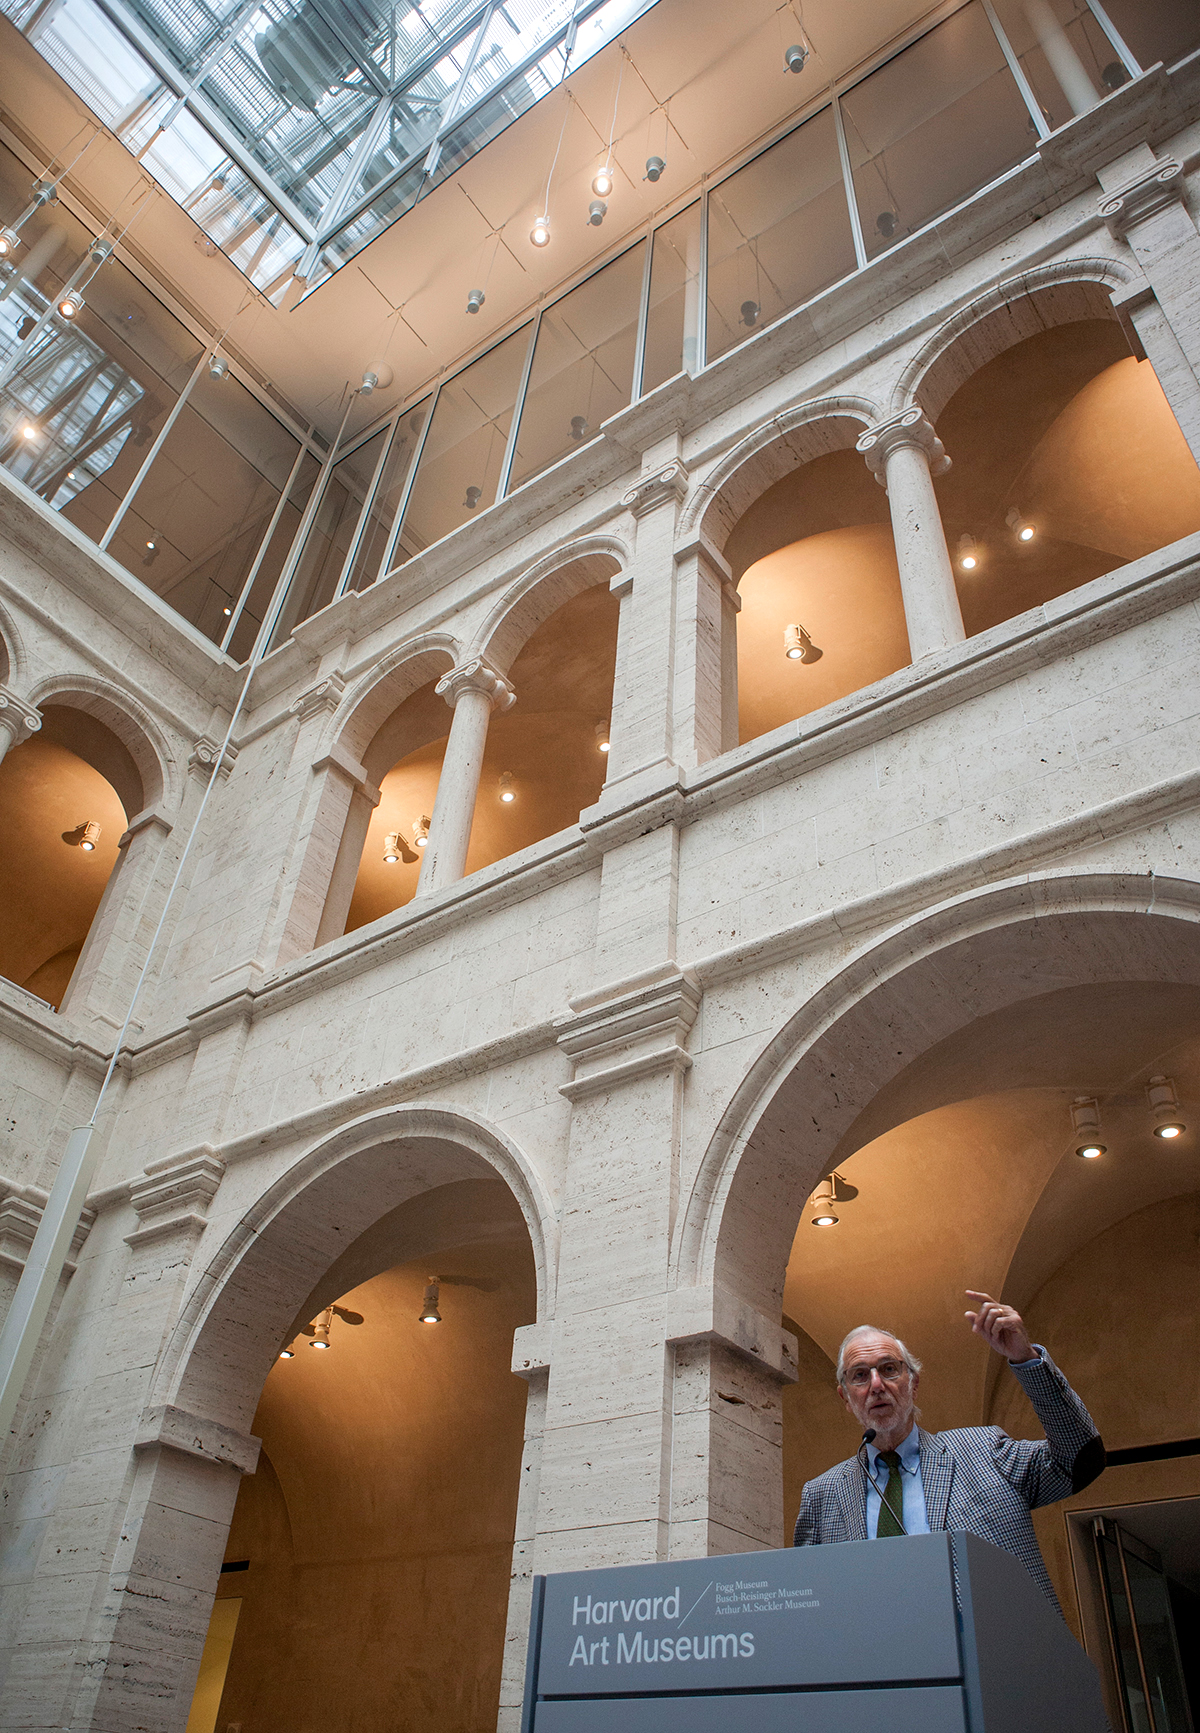 Architect Renzo Piano spoke at the new Harvard Art Museums building last week, the culmination of a six-year-long restoration and expansion project. / Photo by Olga Khvan